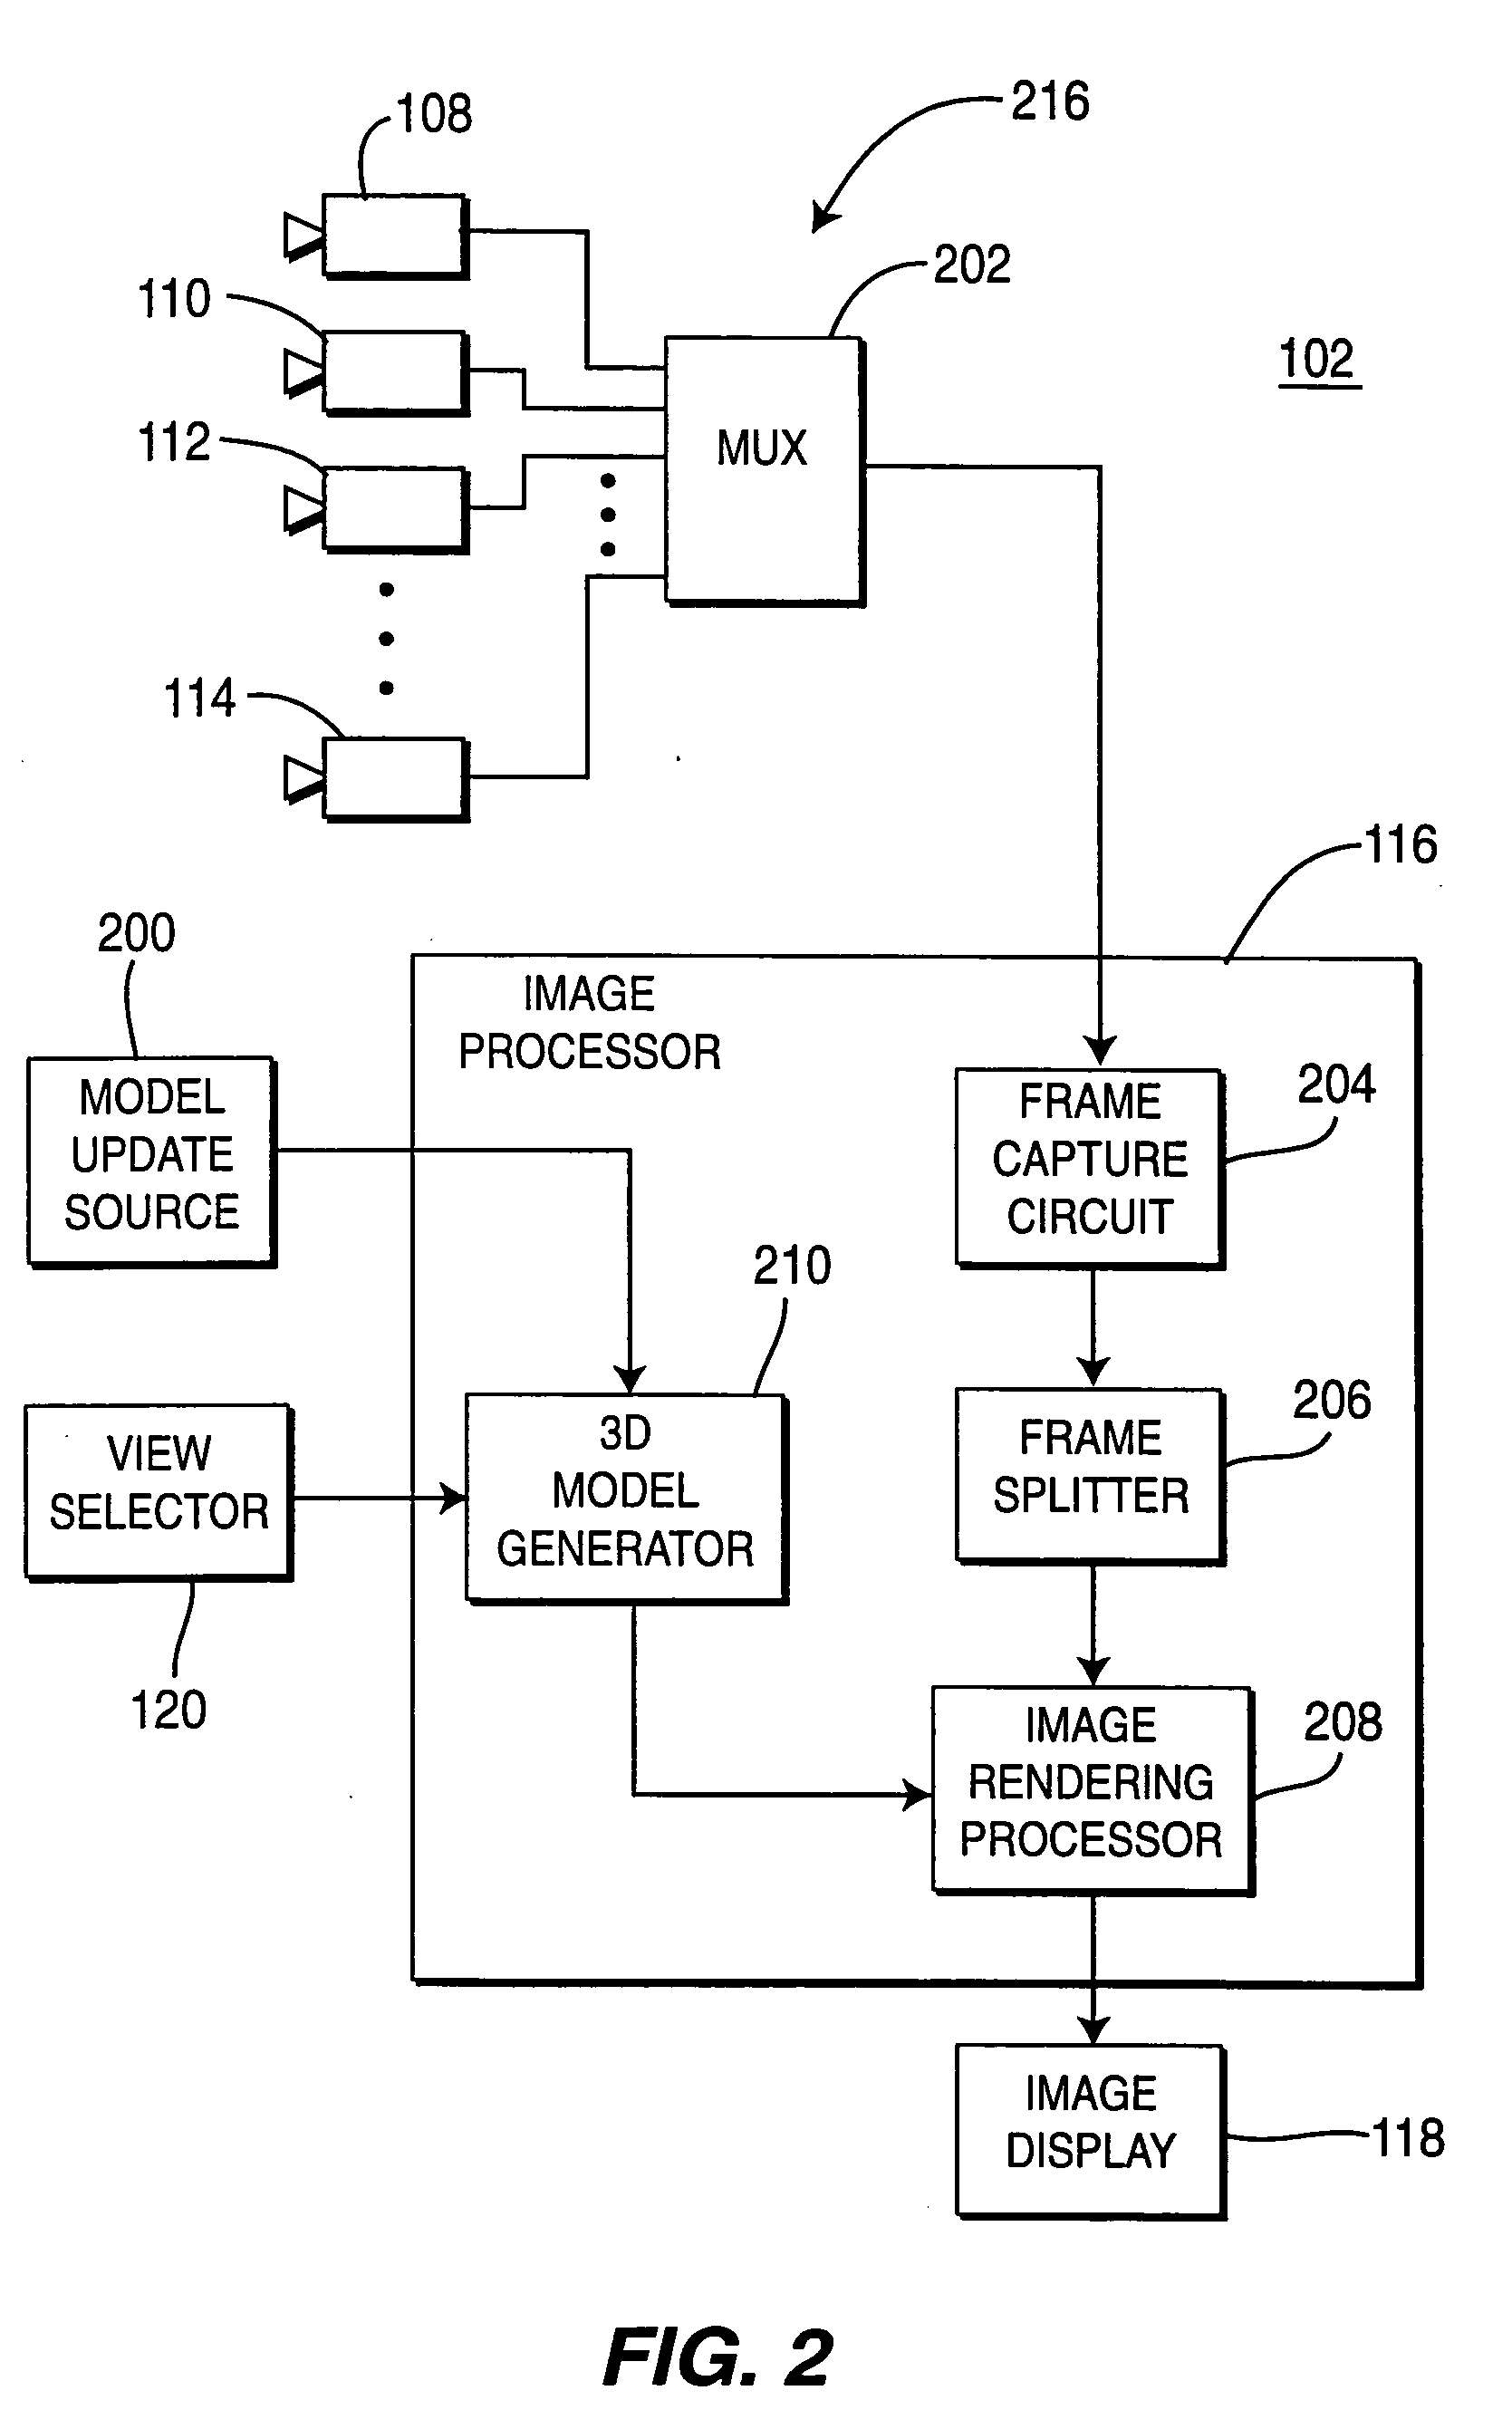 Method and apparatus for providing immersive surveillance